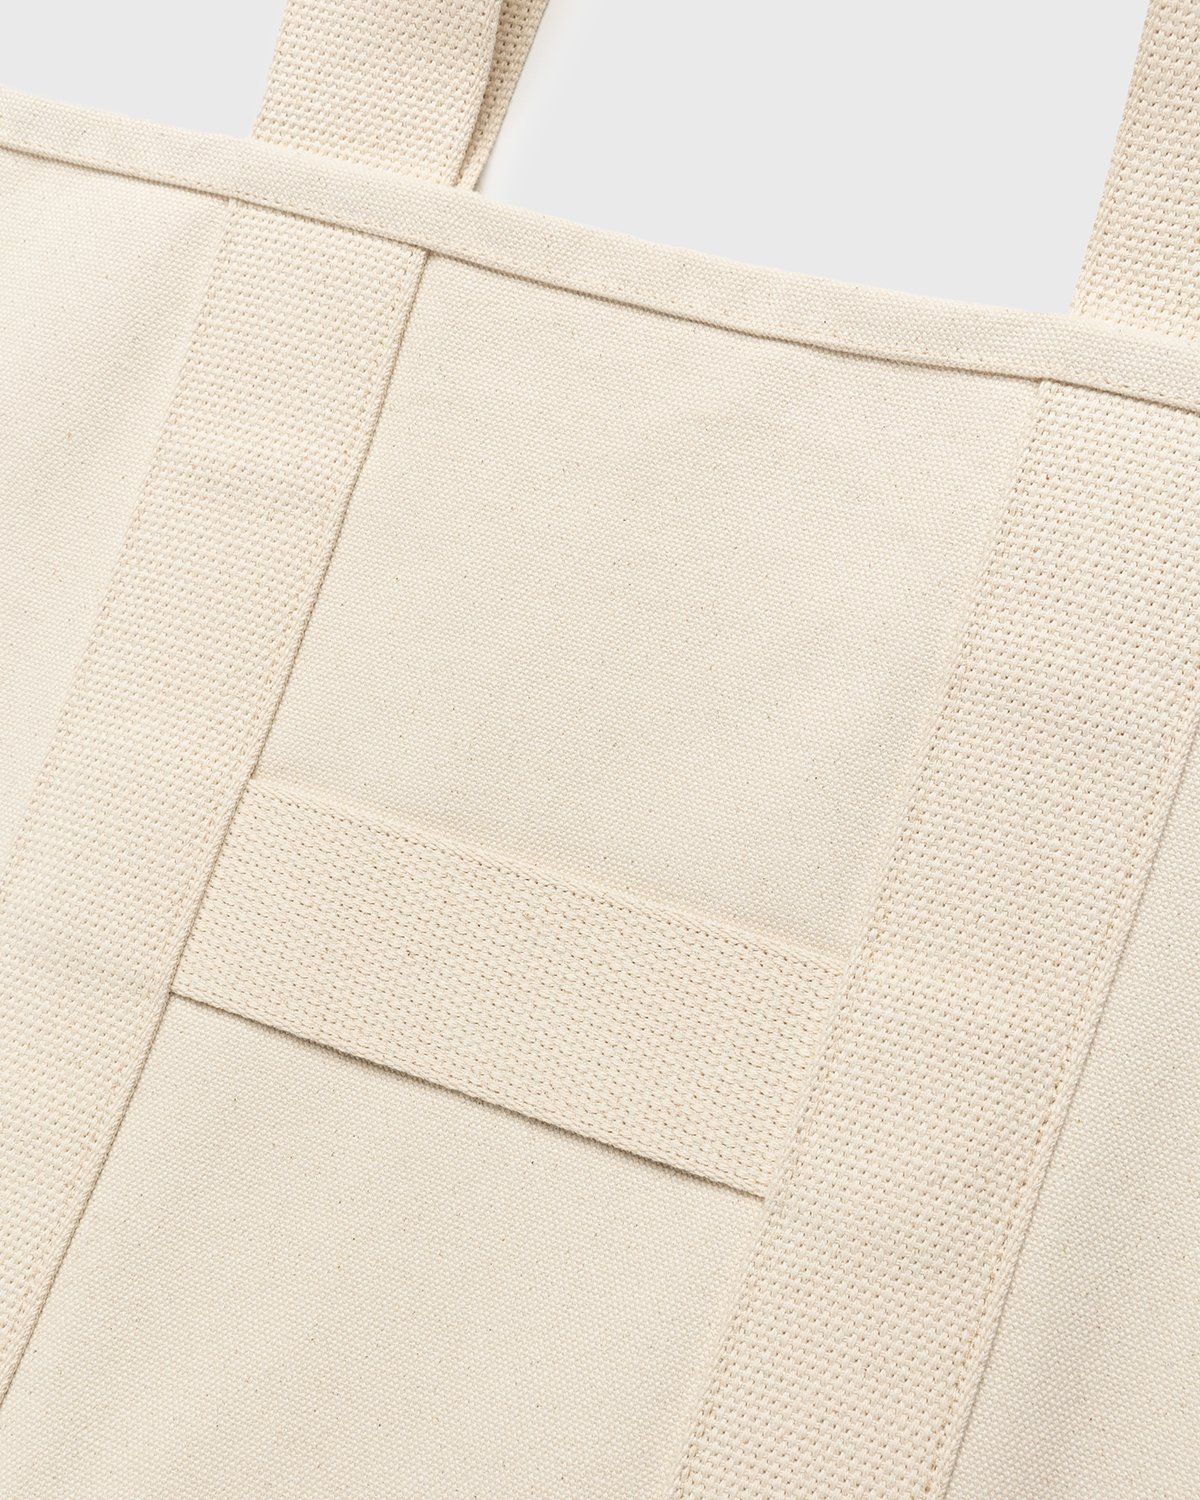 Highsnobiety – XL Canvas "H" Tote Natural - Bags - Beige - Image 4